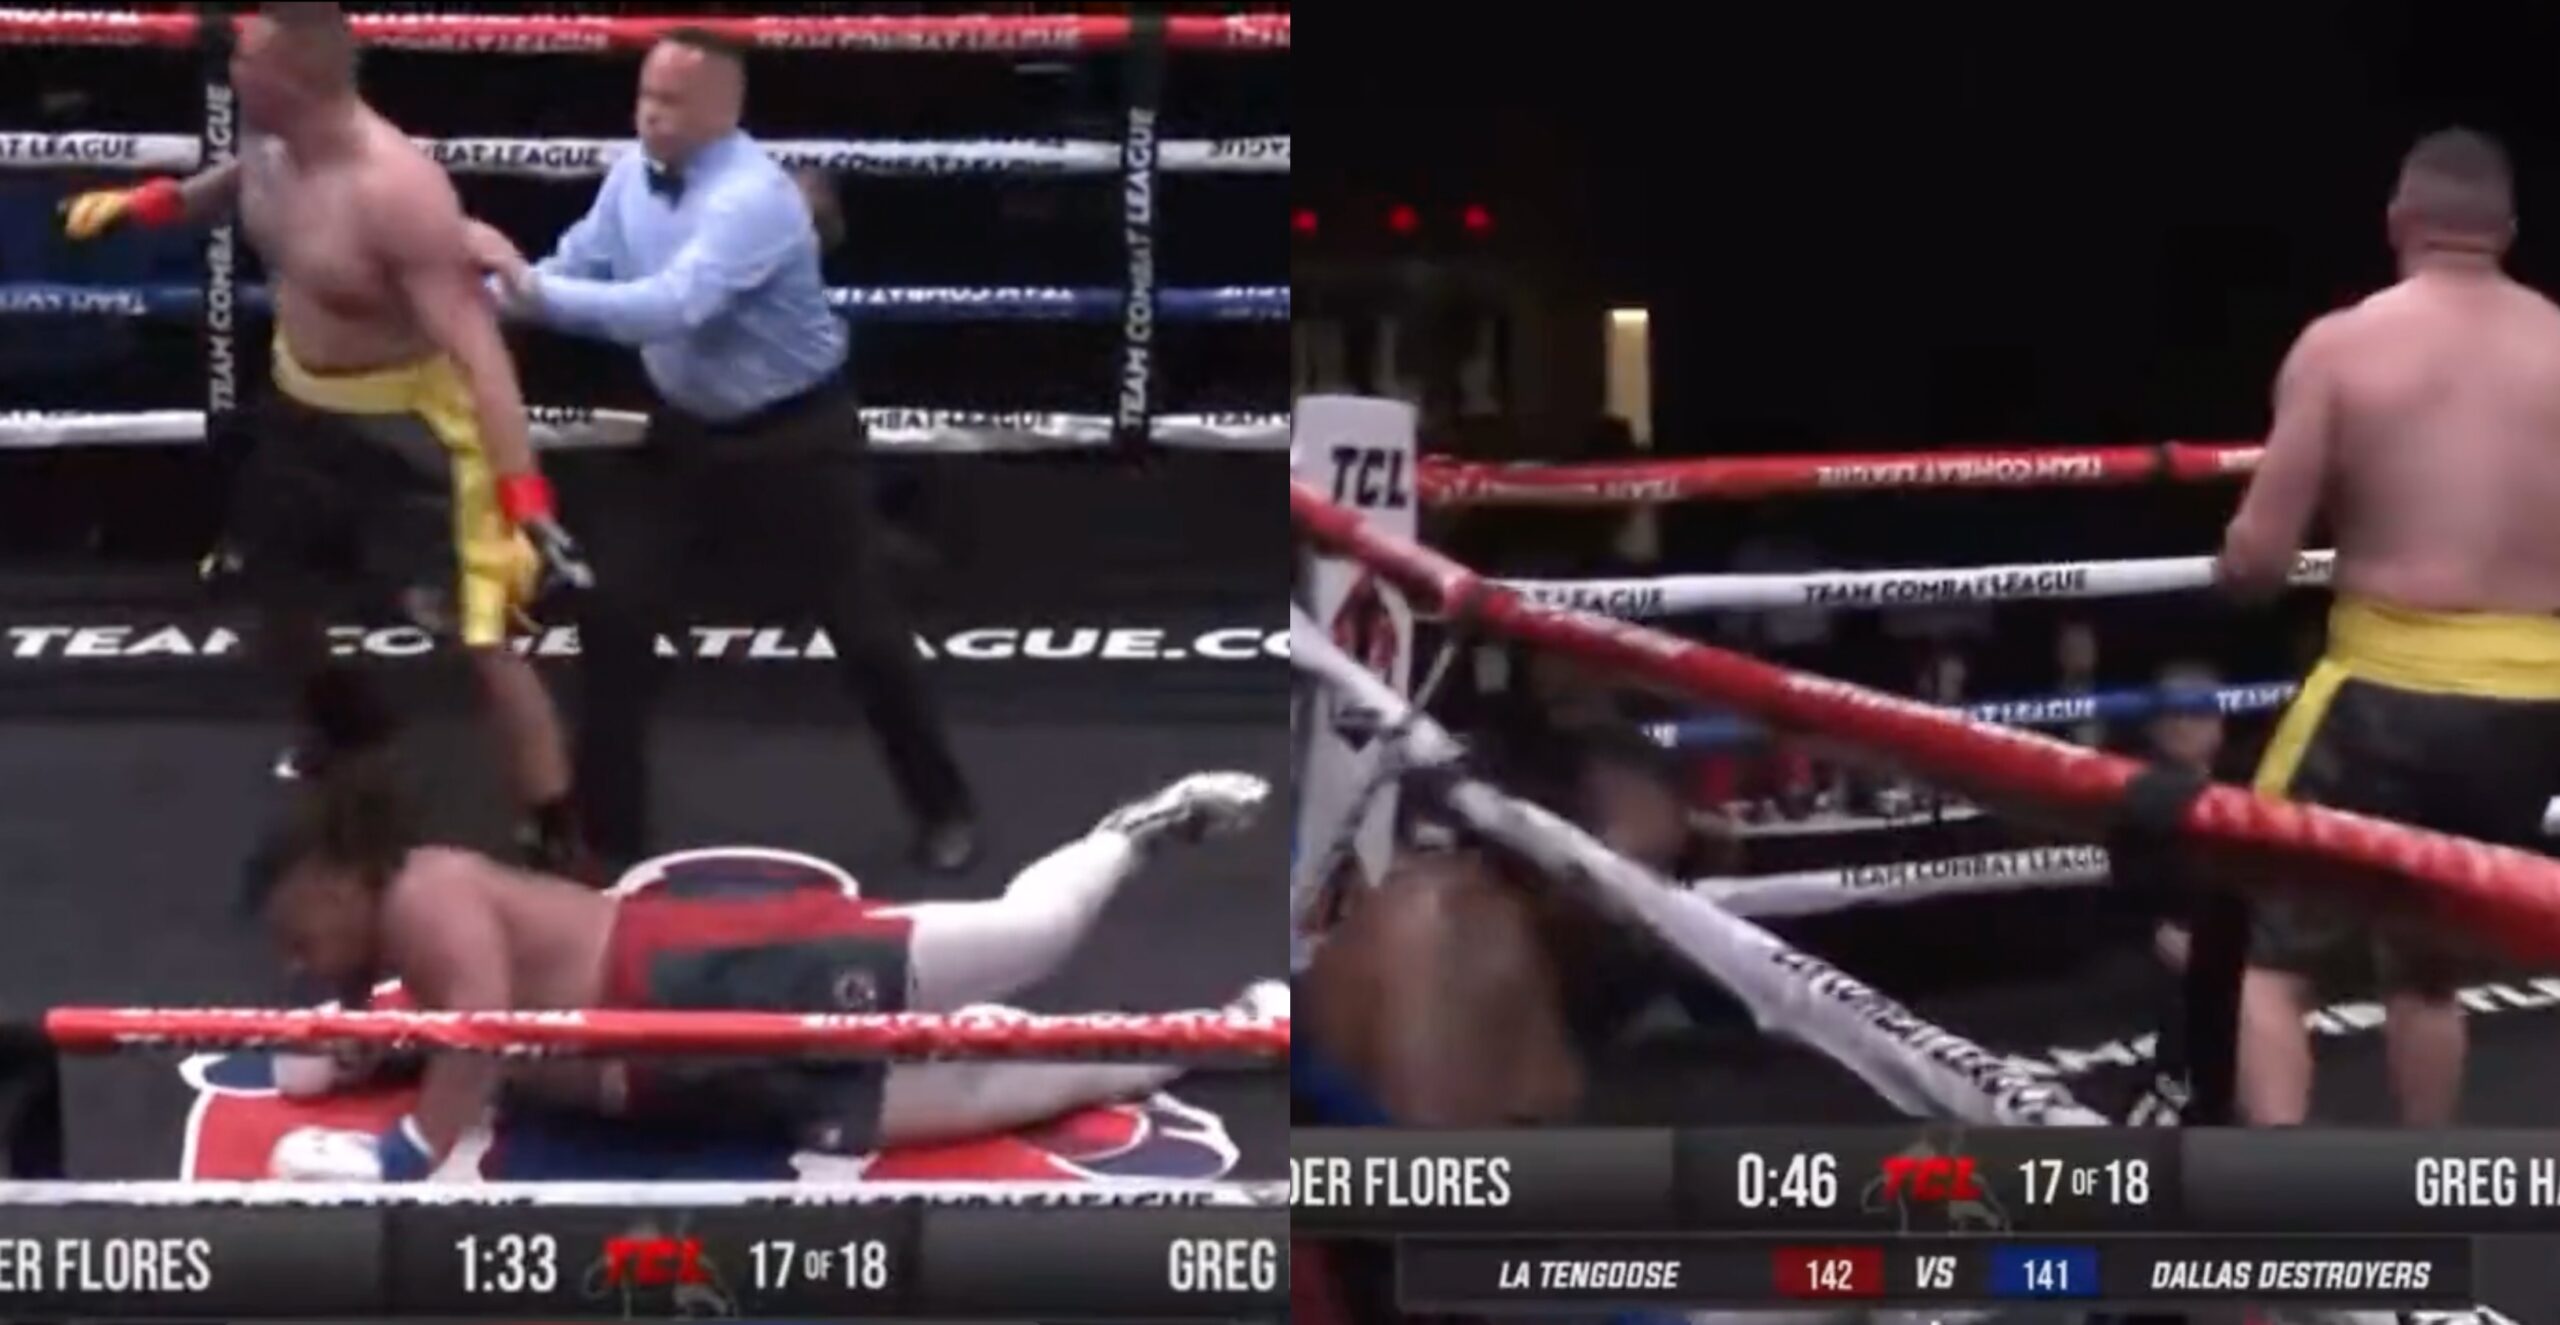 Ex-NFL Defensive End Greg Hardy Got Knocked Out Multiple Times During His Latest Boxing Match